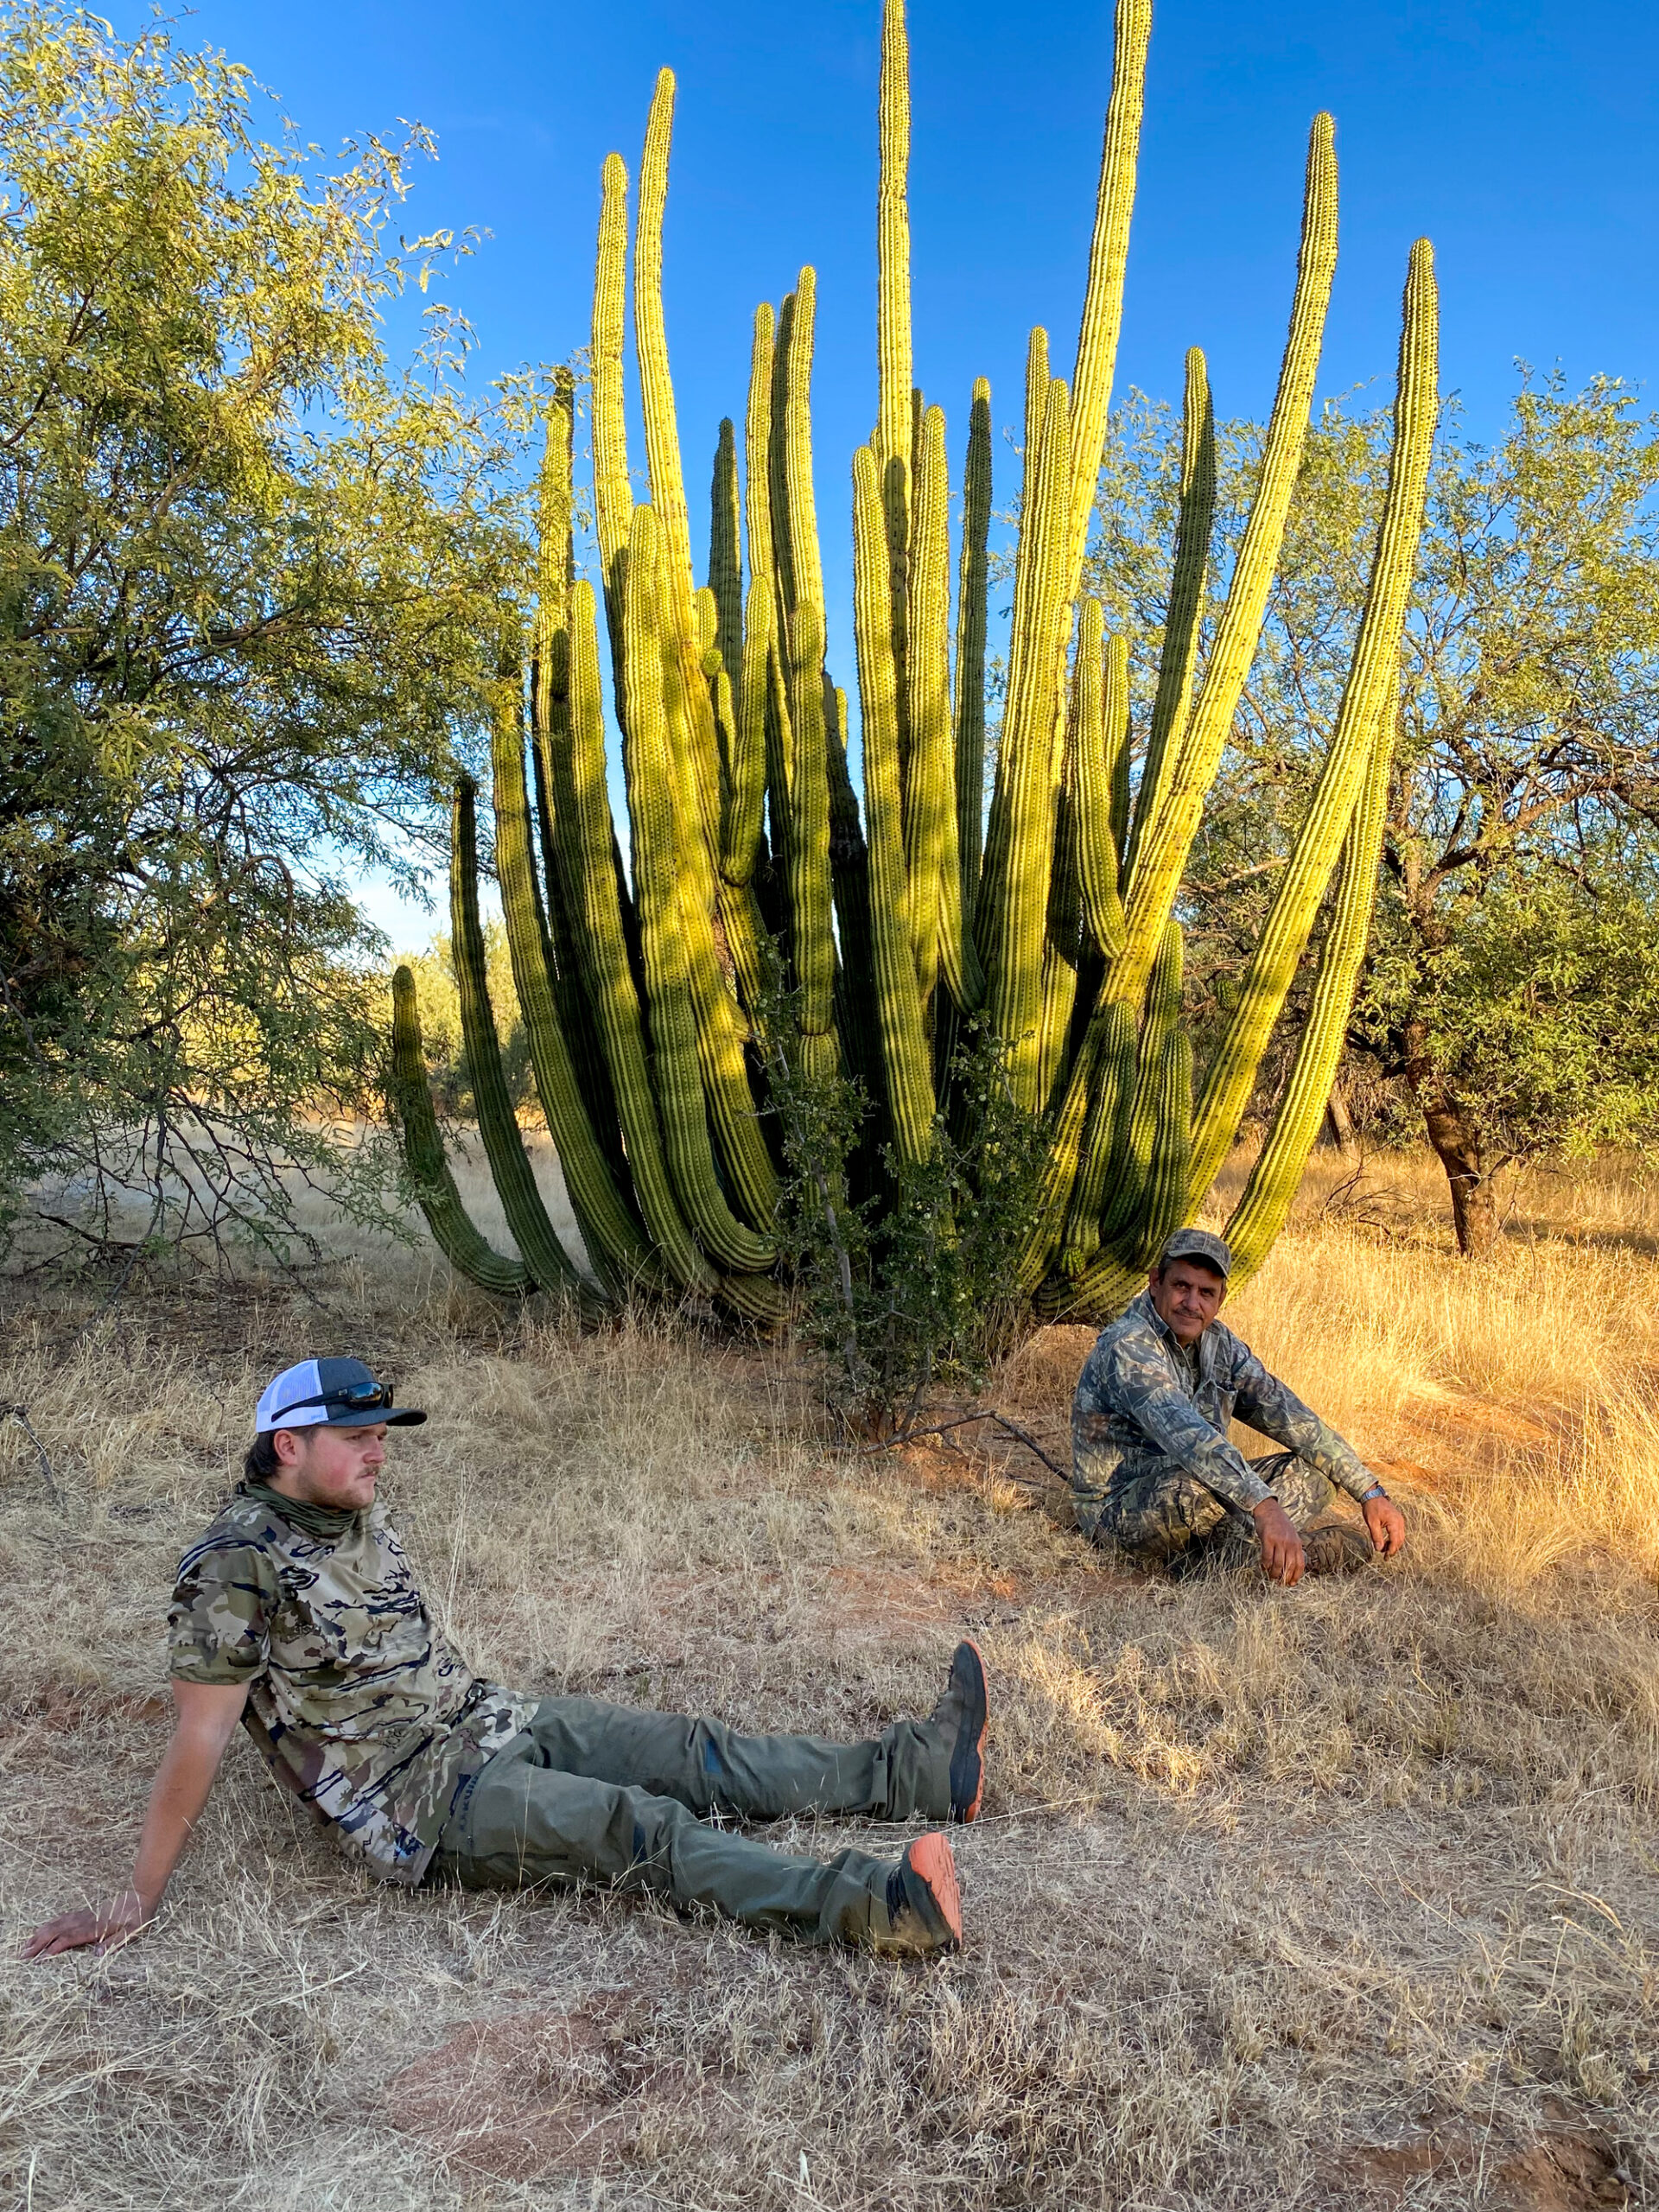 Two hunters relax near a large cactus